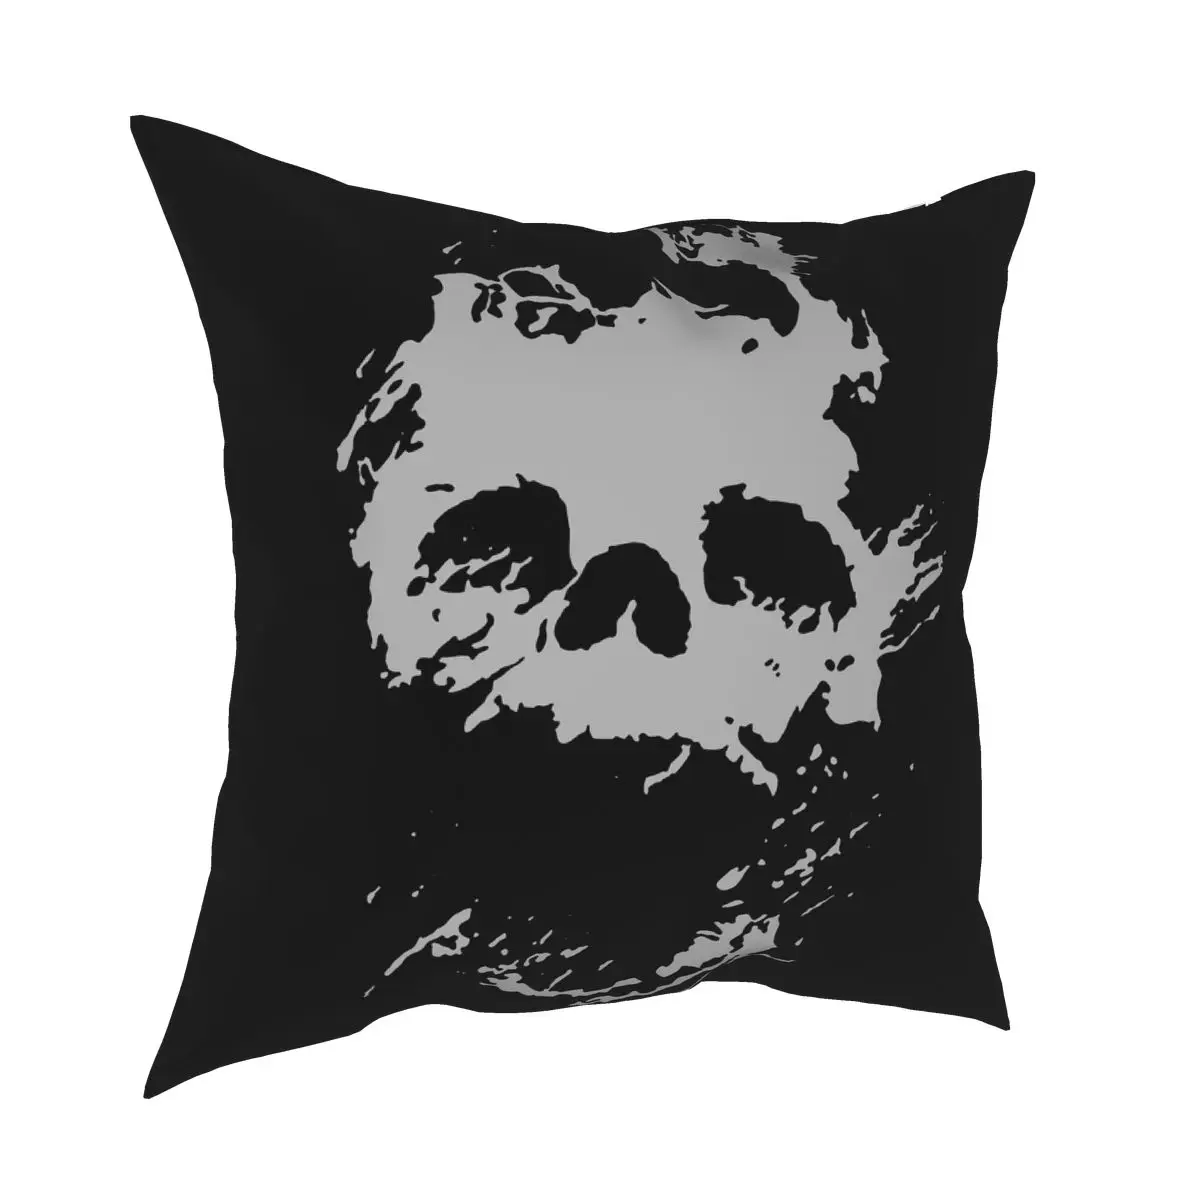 

Fading Light Death Skull Pillowcase Soft Fabric Cushion Cover Decor Gothic Throw Pillow Case Cover Home Square 45X45cm